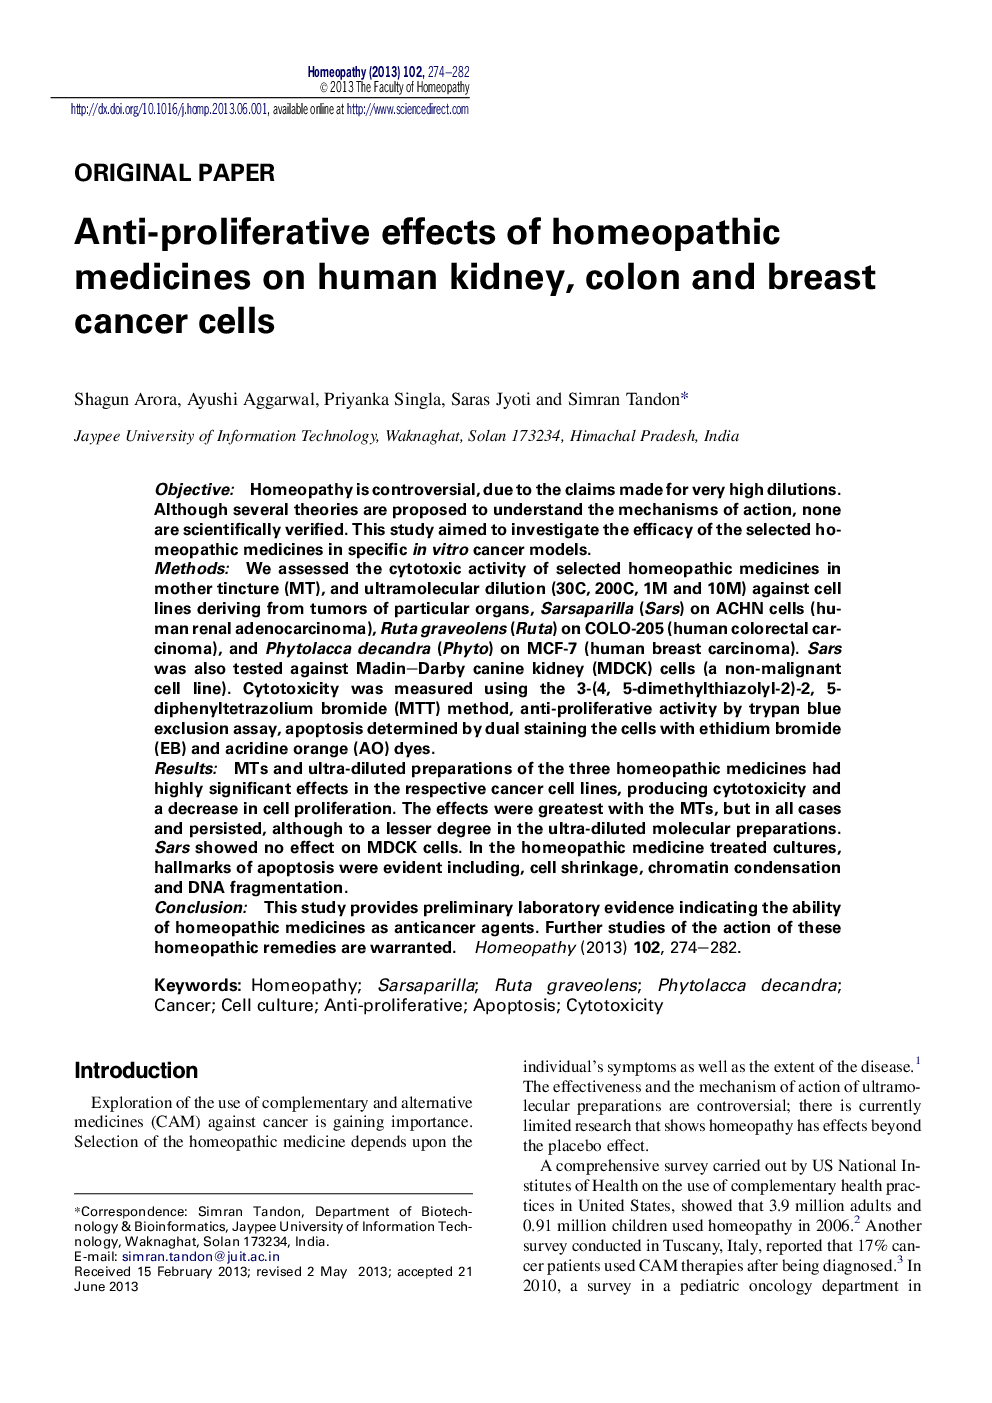 Anti-proliferative effects of homeopathic medicines on human kidney, colon and breast cancer cells